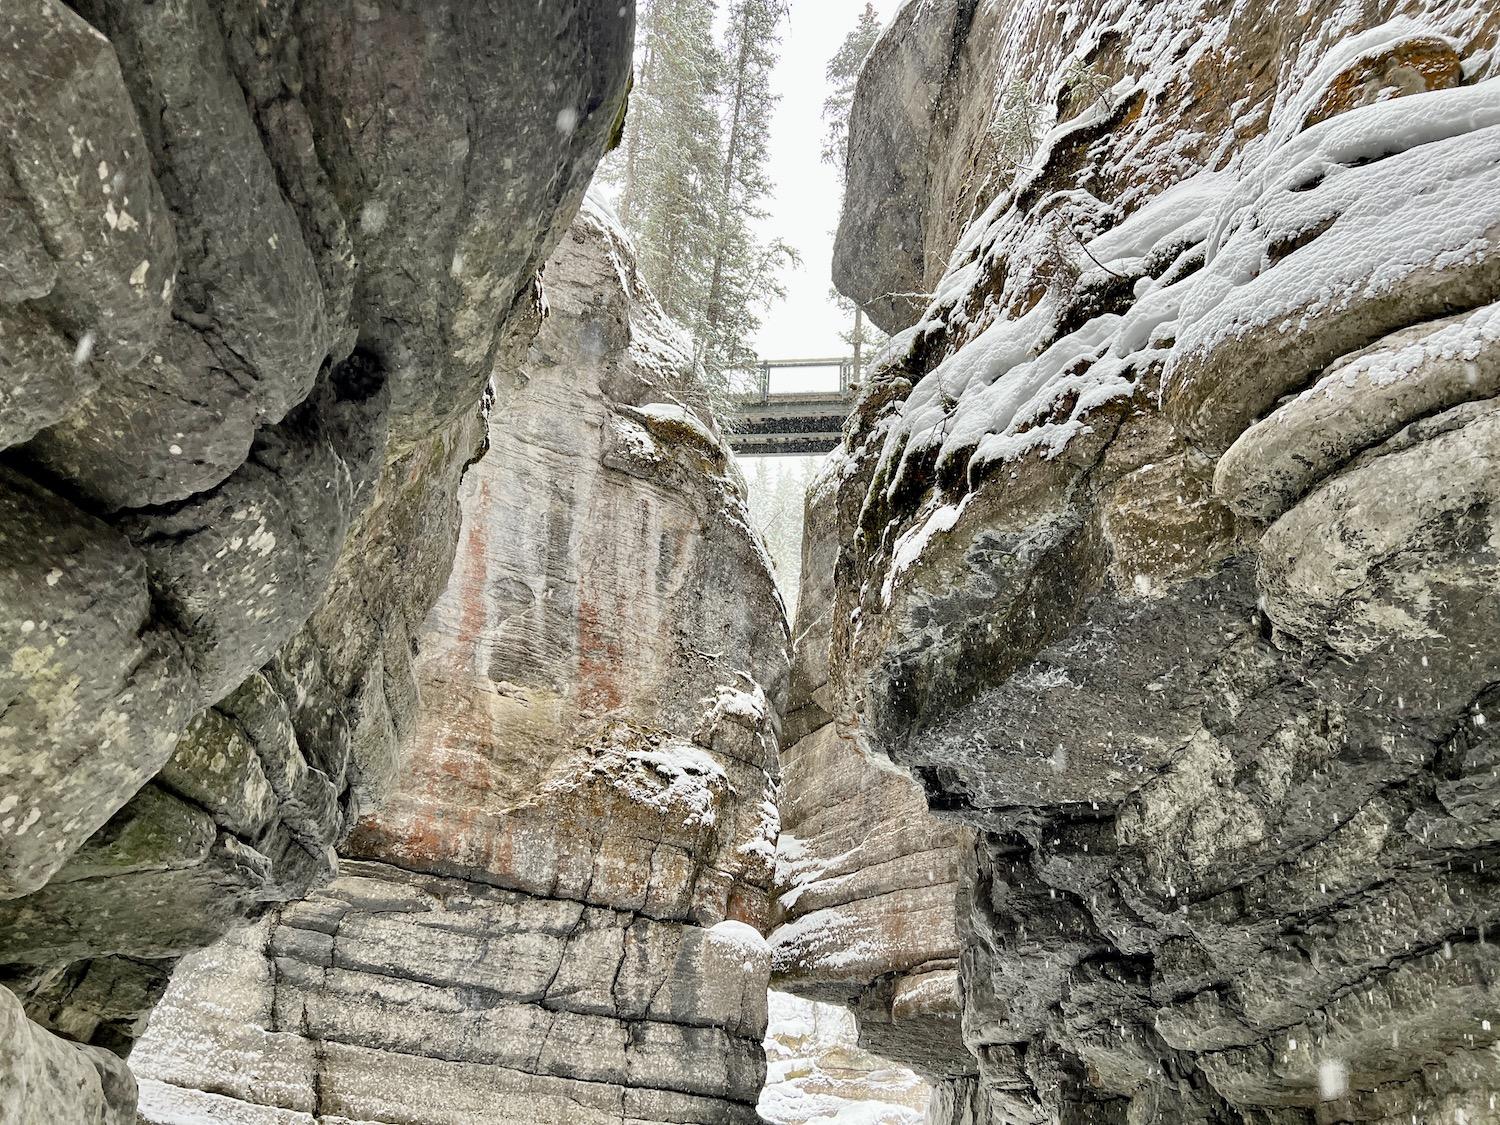 From the Maligne Canyon floor in winter, a view of one of the historic bridges.